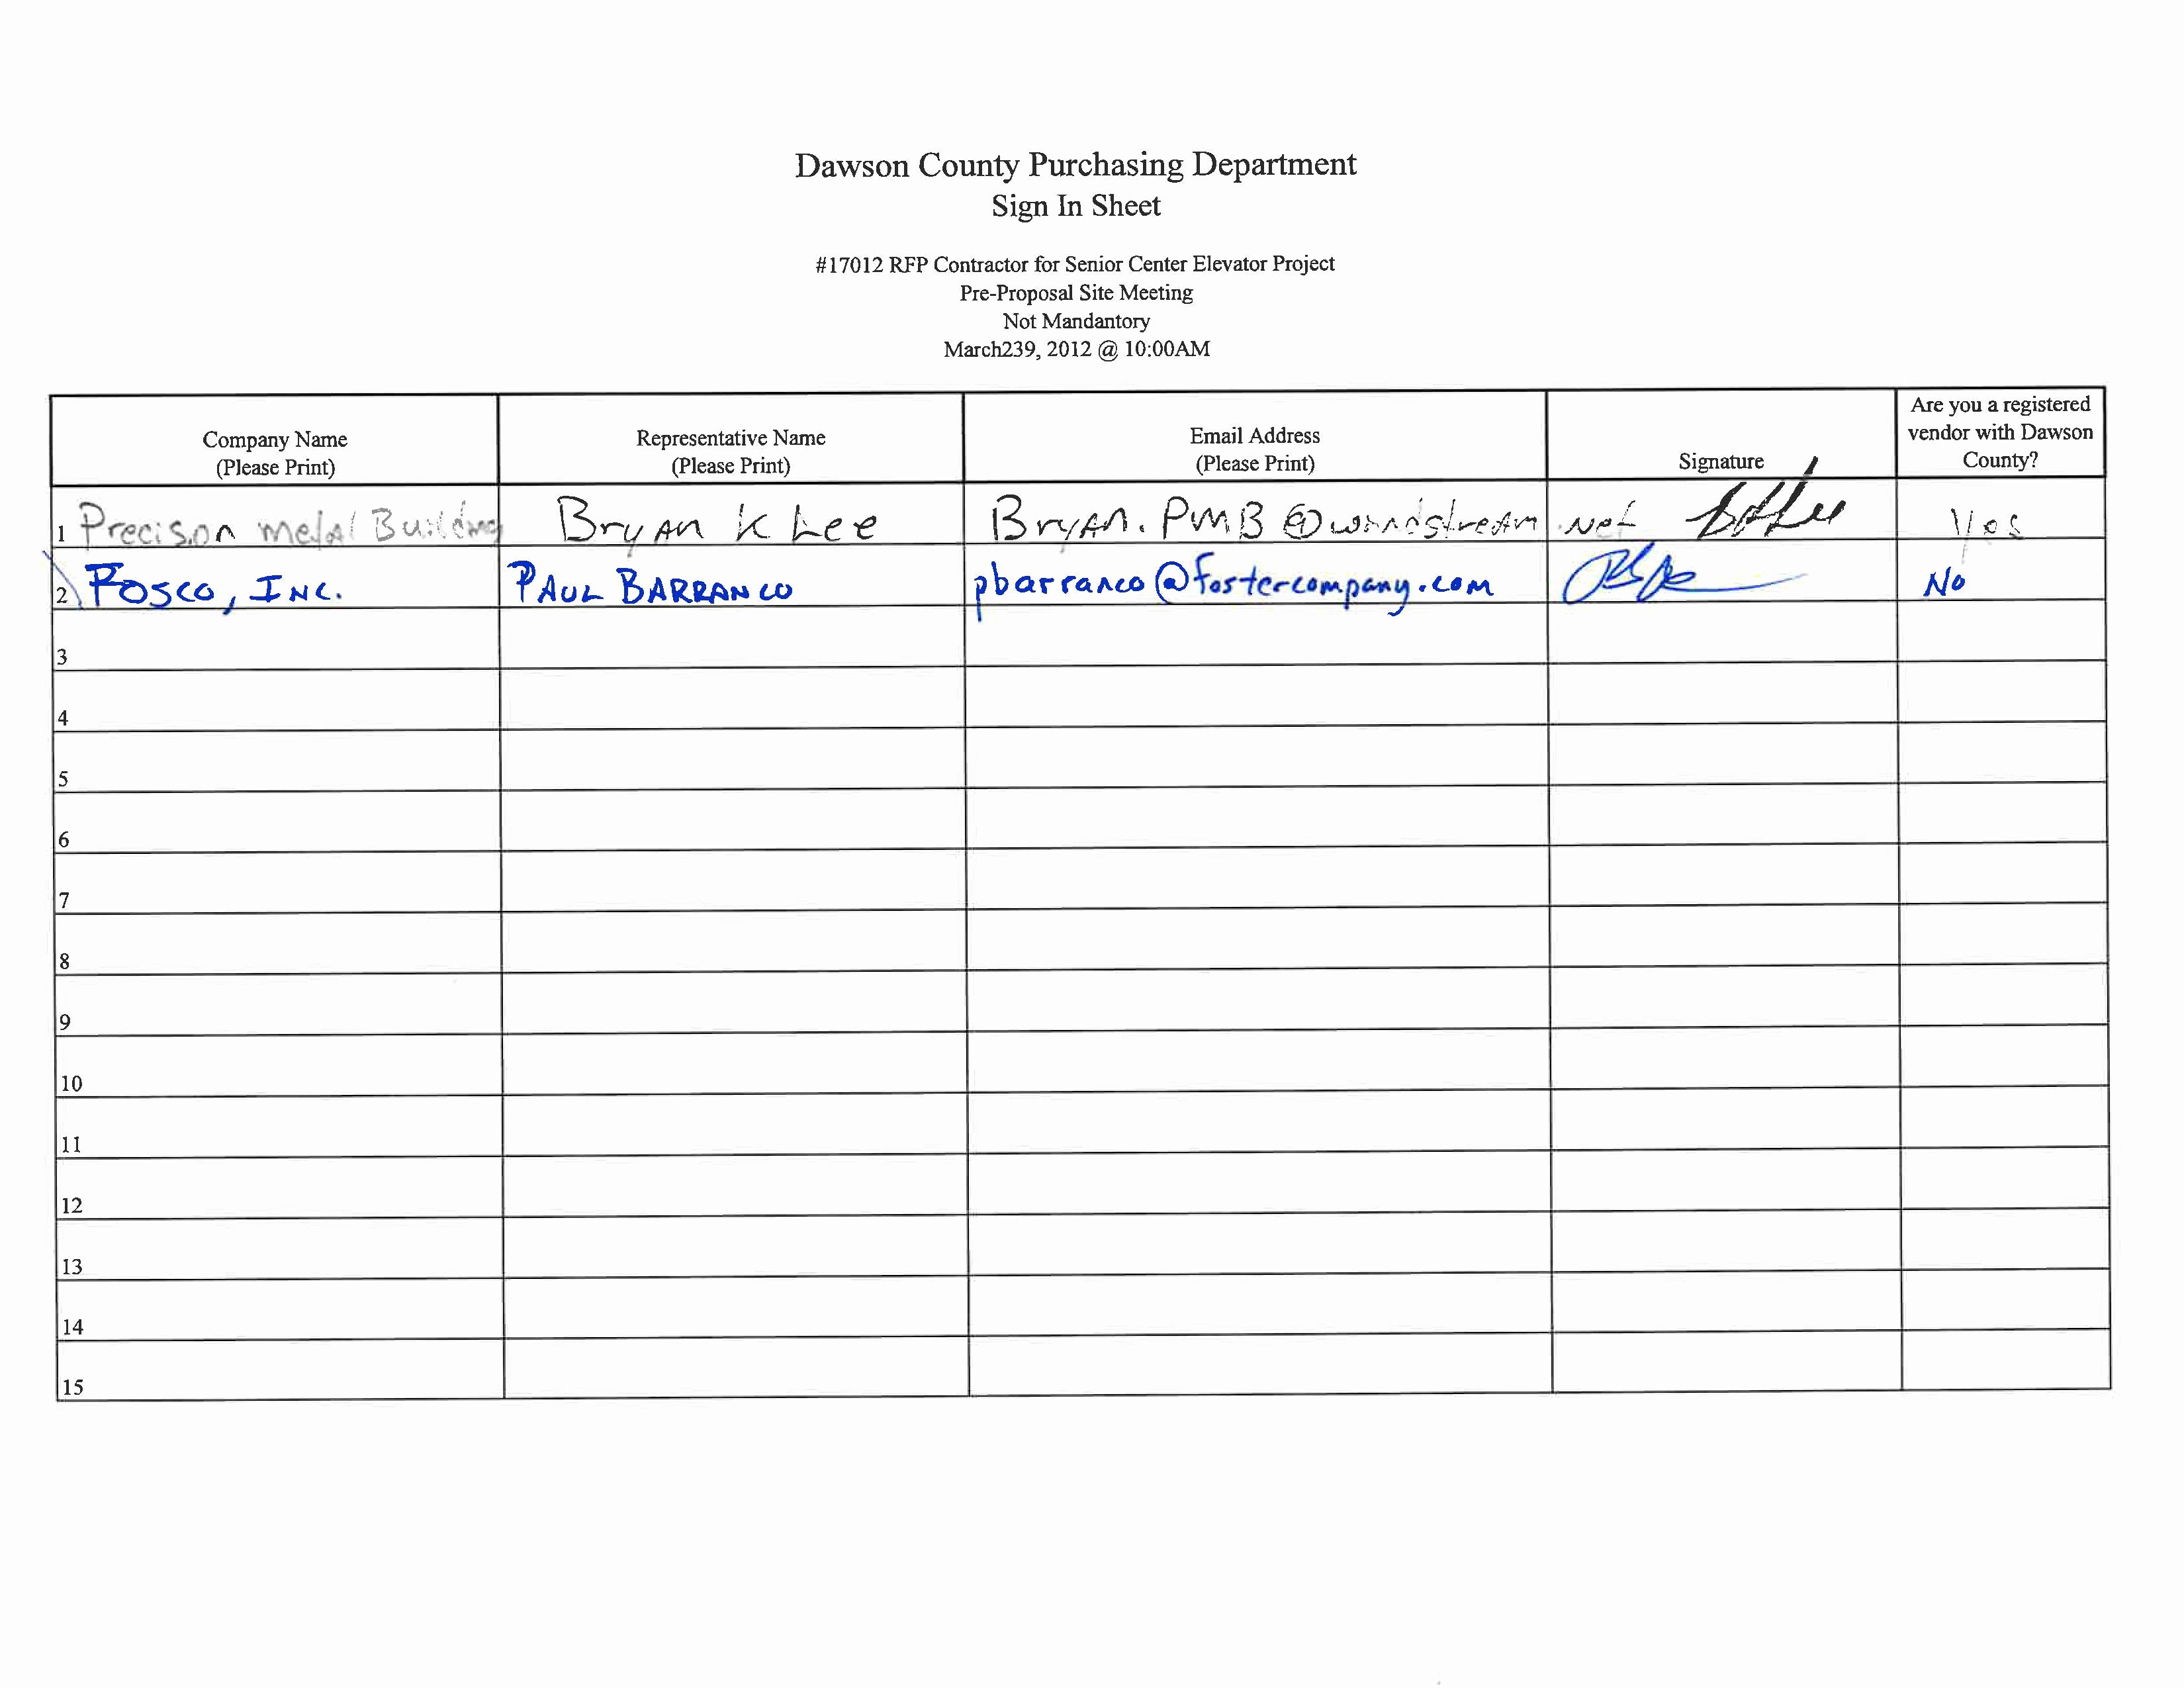 Board Meeting Sign In Sheet Luxury 170 12 Rfp Contractor for Senior Center Elevator Project